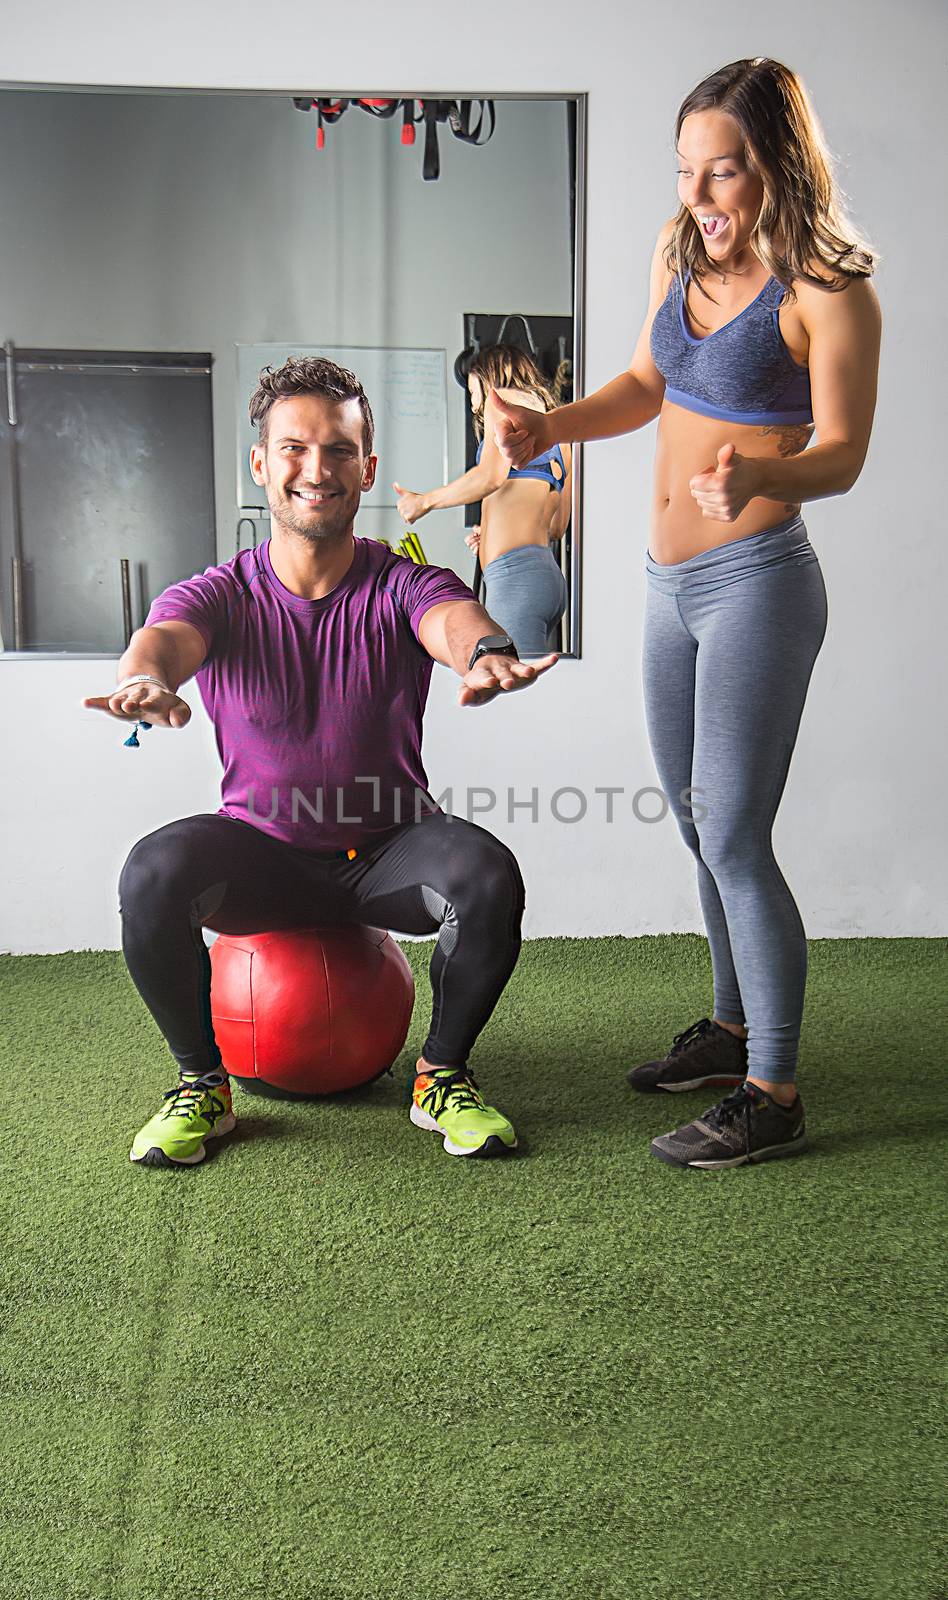 Young woman encouraging a man sitting on a red medicine ball